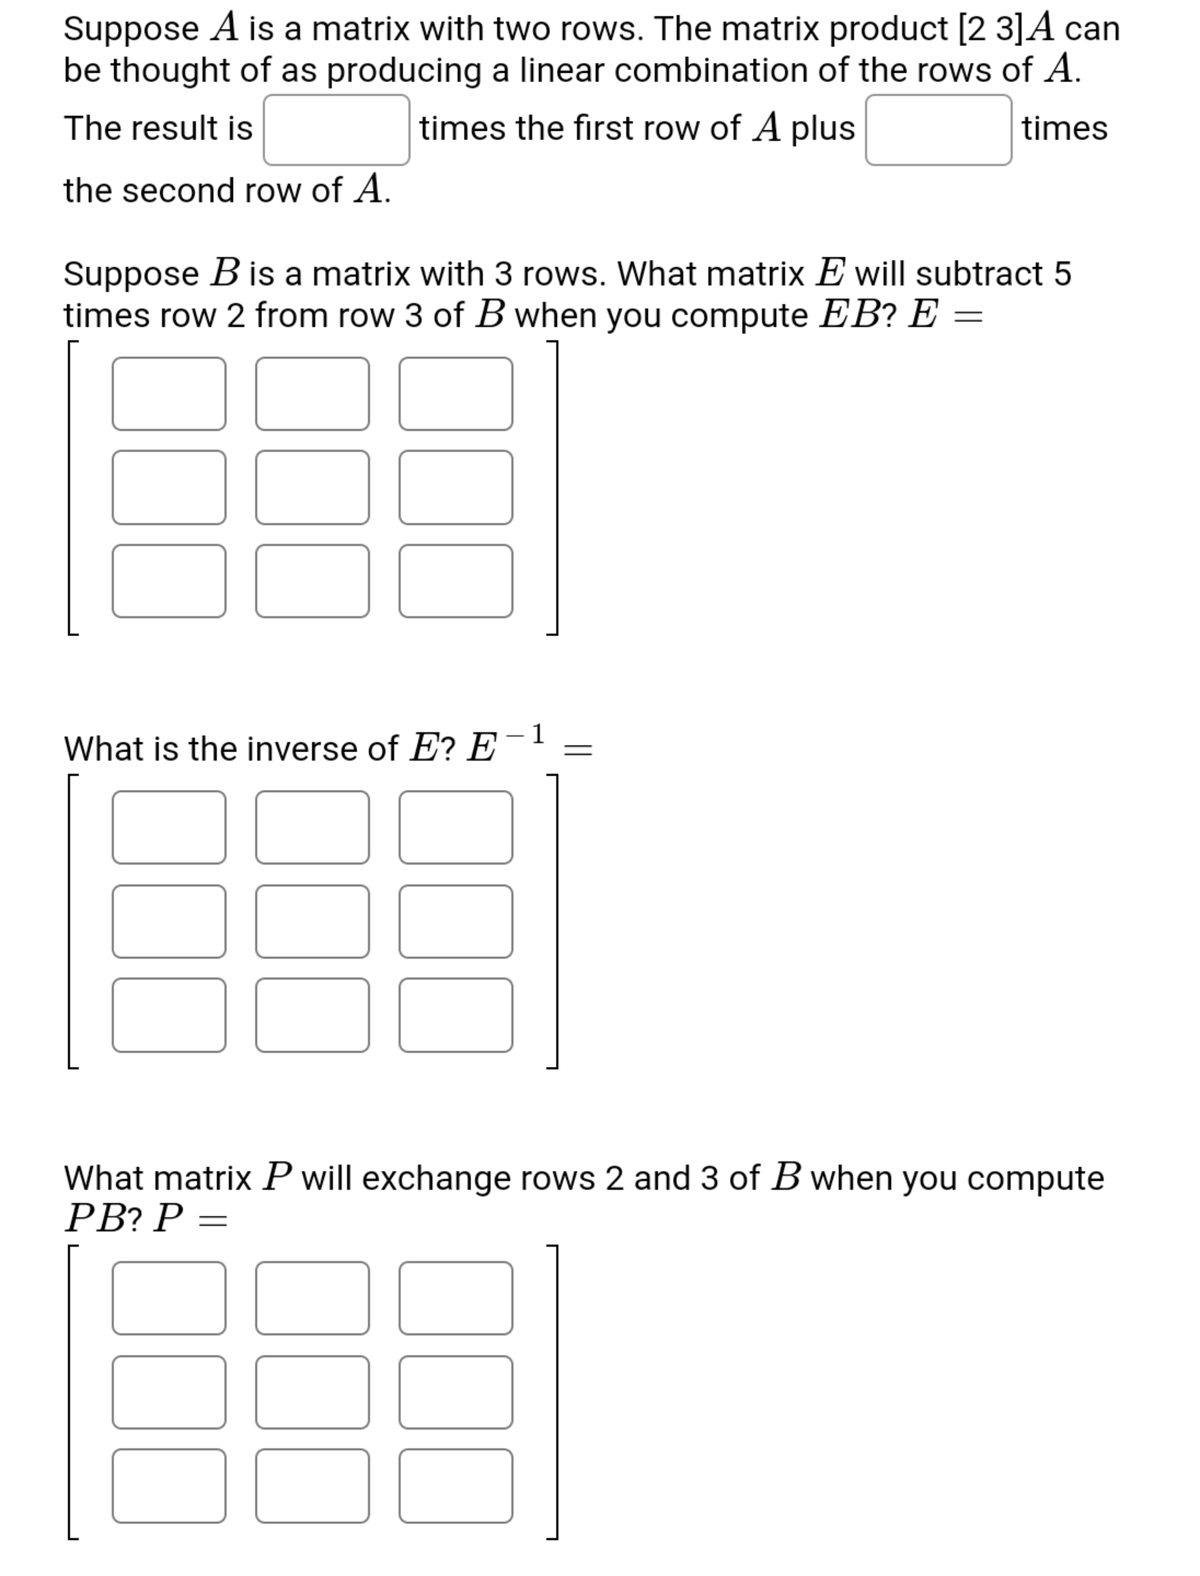 Suppose A is a matrix with two rows. The matrix product [2 3]A can
be thought of as producing a linear combination of the rows of A.
The result is
times the first row of A plus
times
the second row of A.
Suppose B is a matrix with 3 rows. What matrix E will subtract 5
times row 2 from row 3 of B when you compute EB? E =
1
What is the inverse of E? E
What matrix P will exchange rows 2 and 3 of B when you compute
PВ? Р —
00
